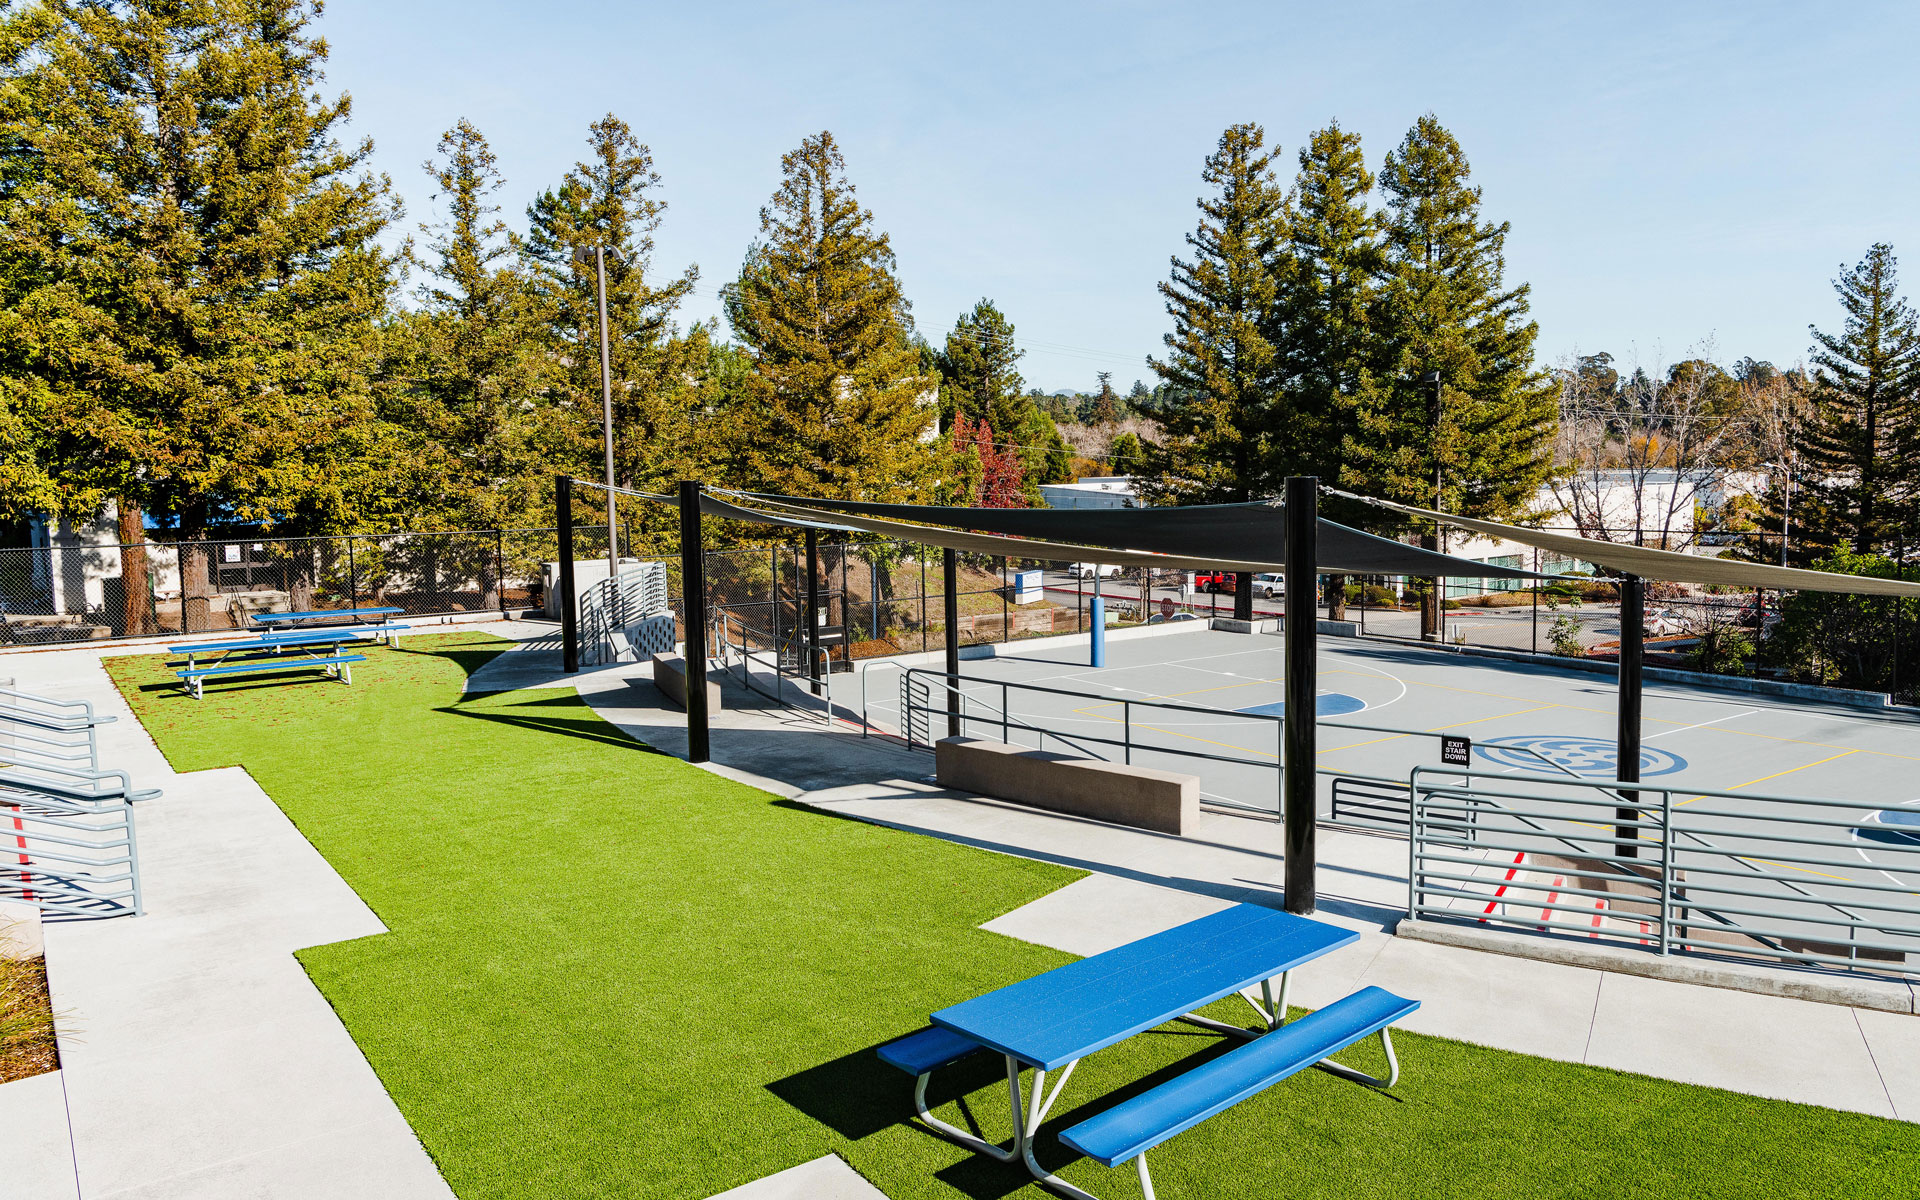 Basketball court, synthetic turf area, and picnic tables